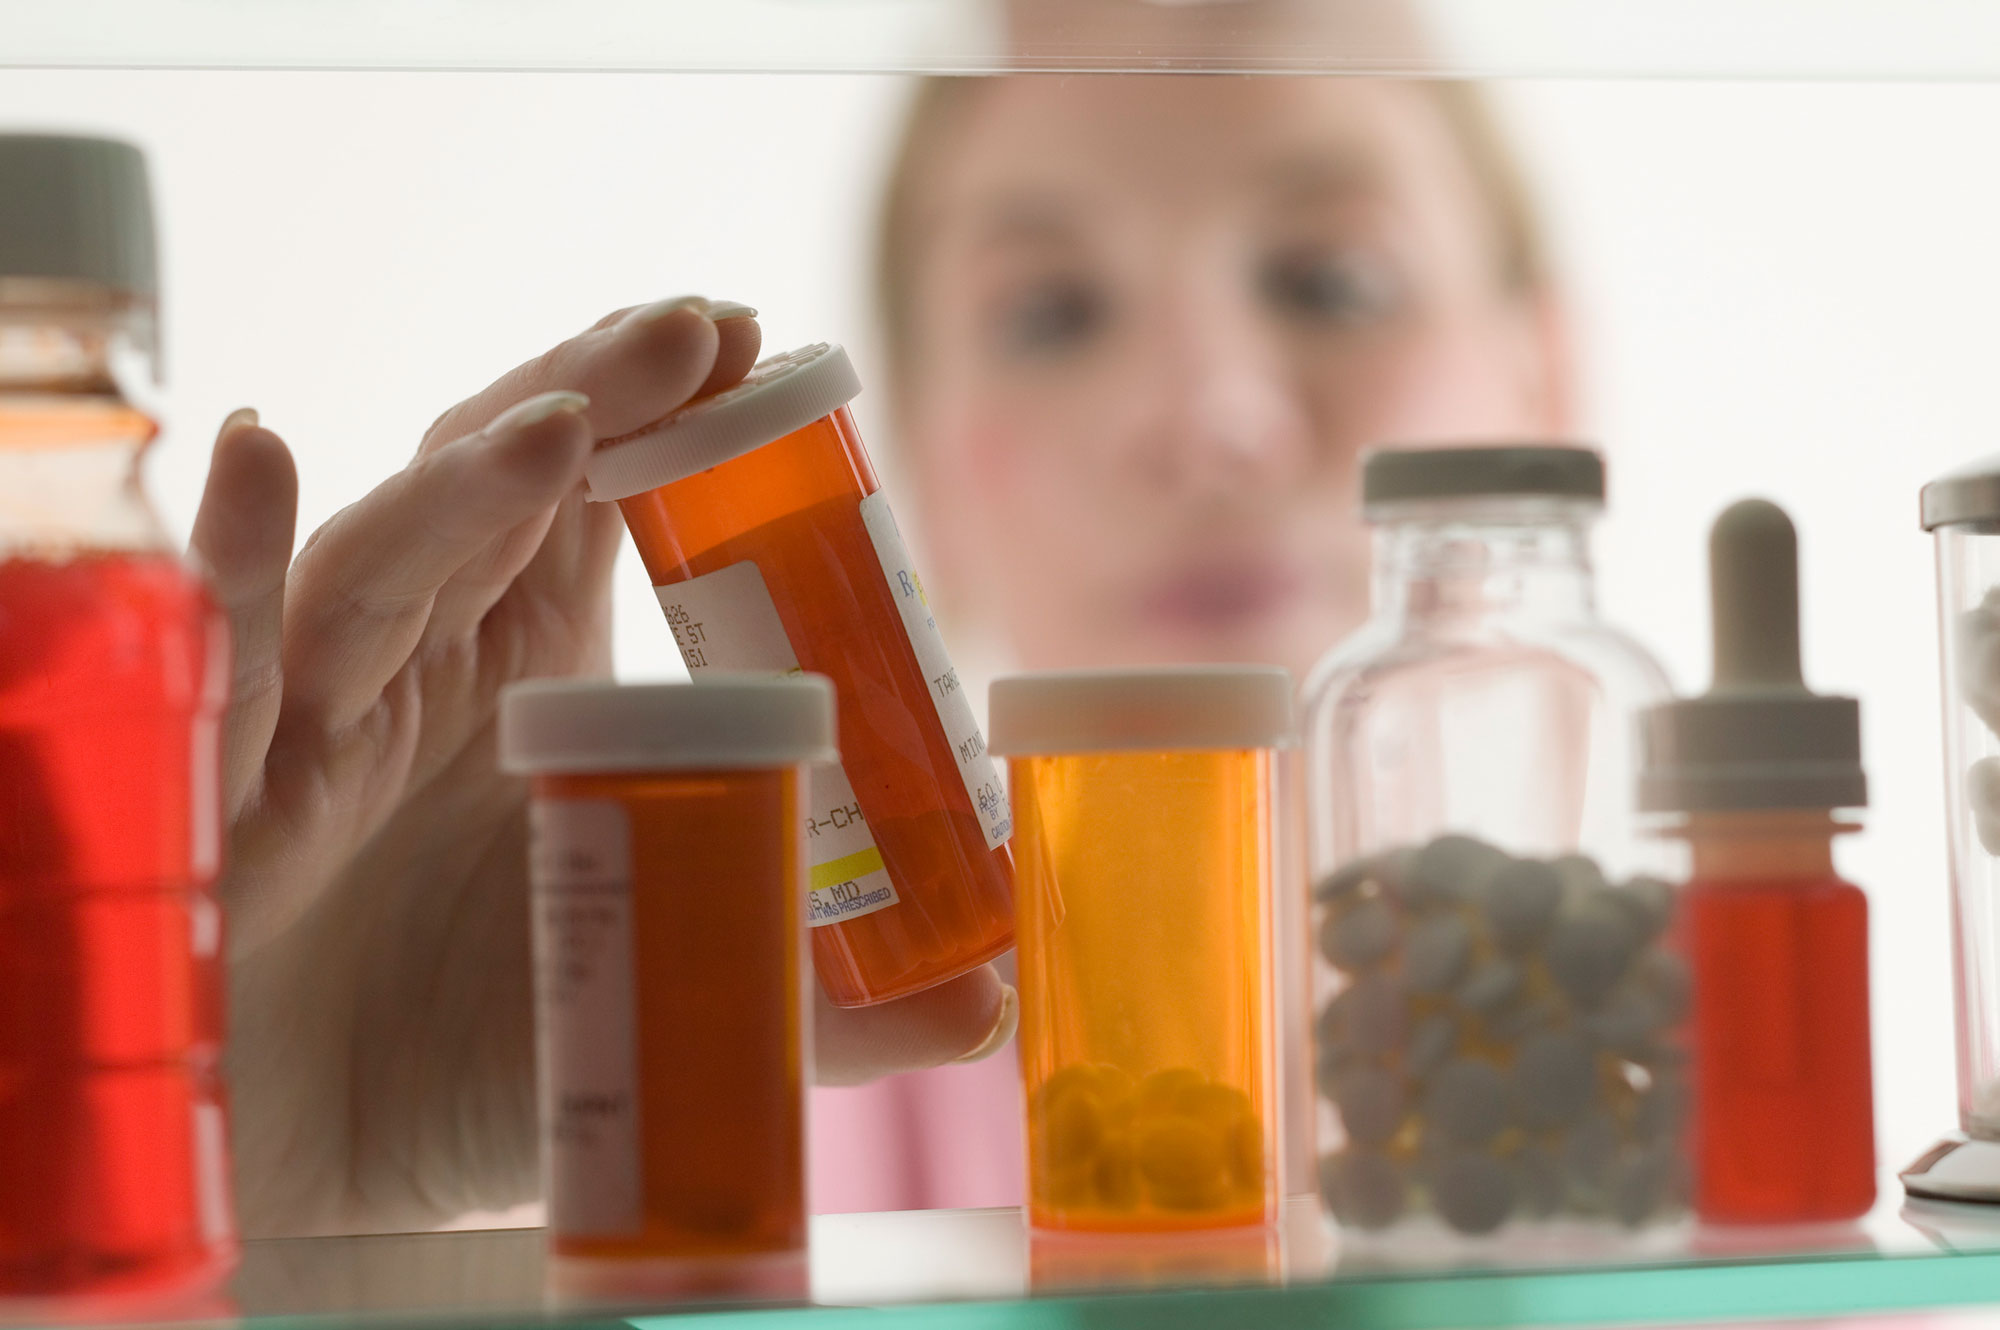 Dementia-causing drugs commonly prescribed to women